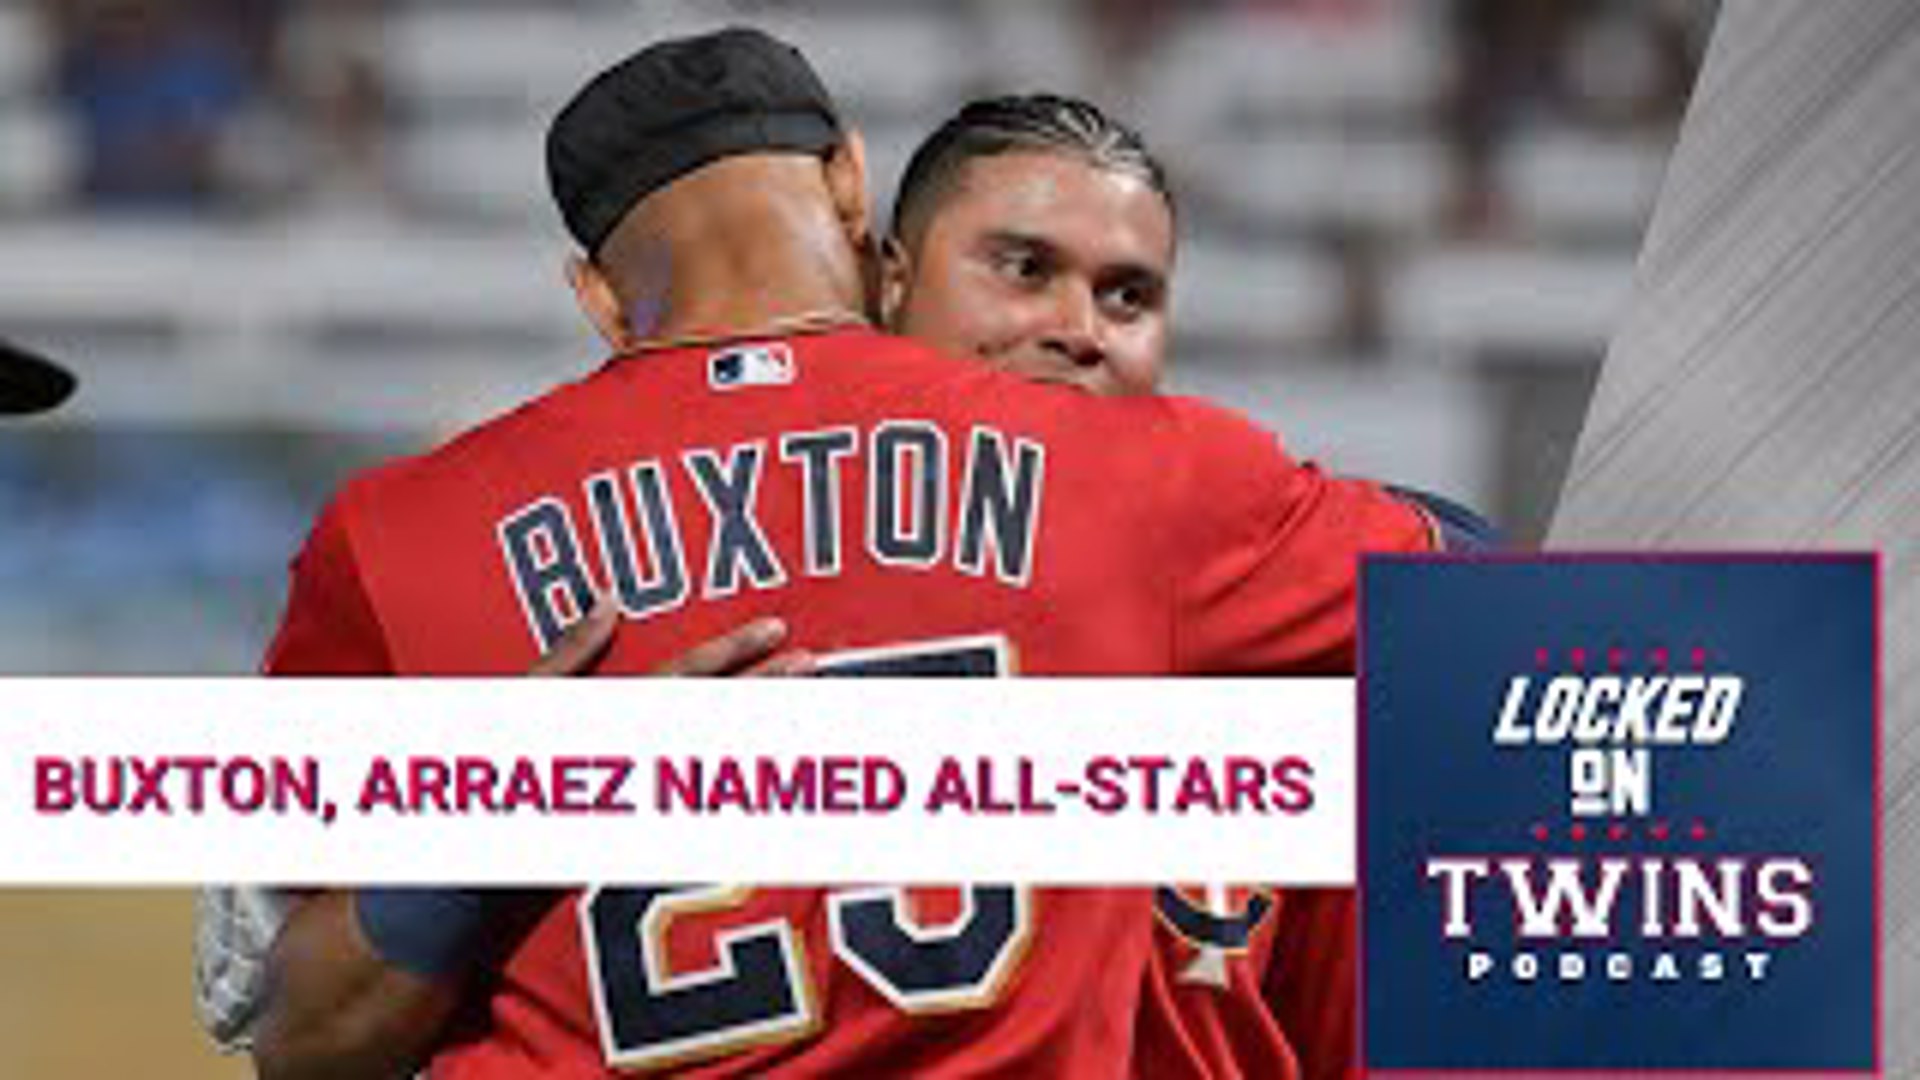 Byron Buxton, Luis Arraez named to 2022 All-Star Game